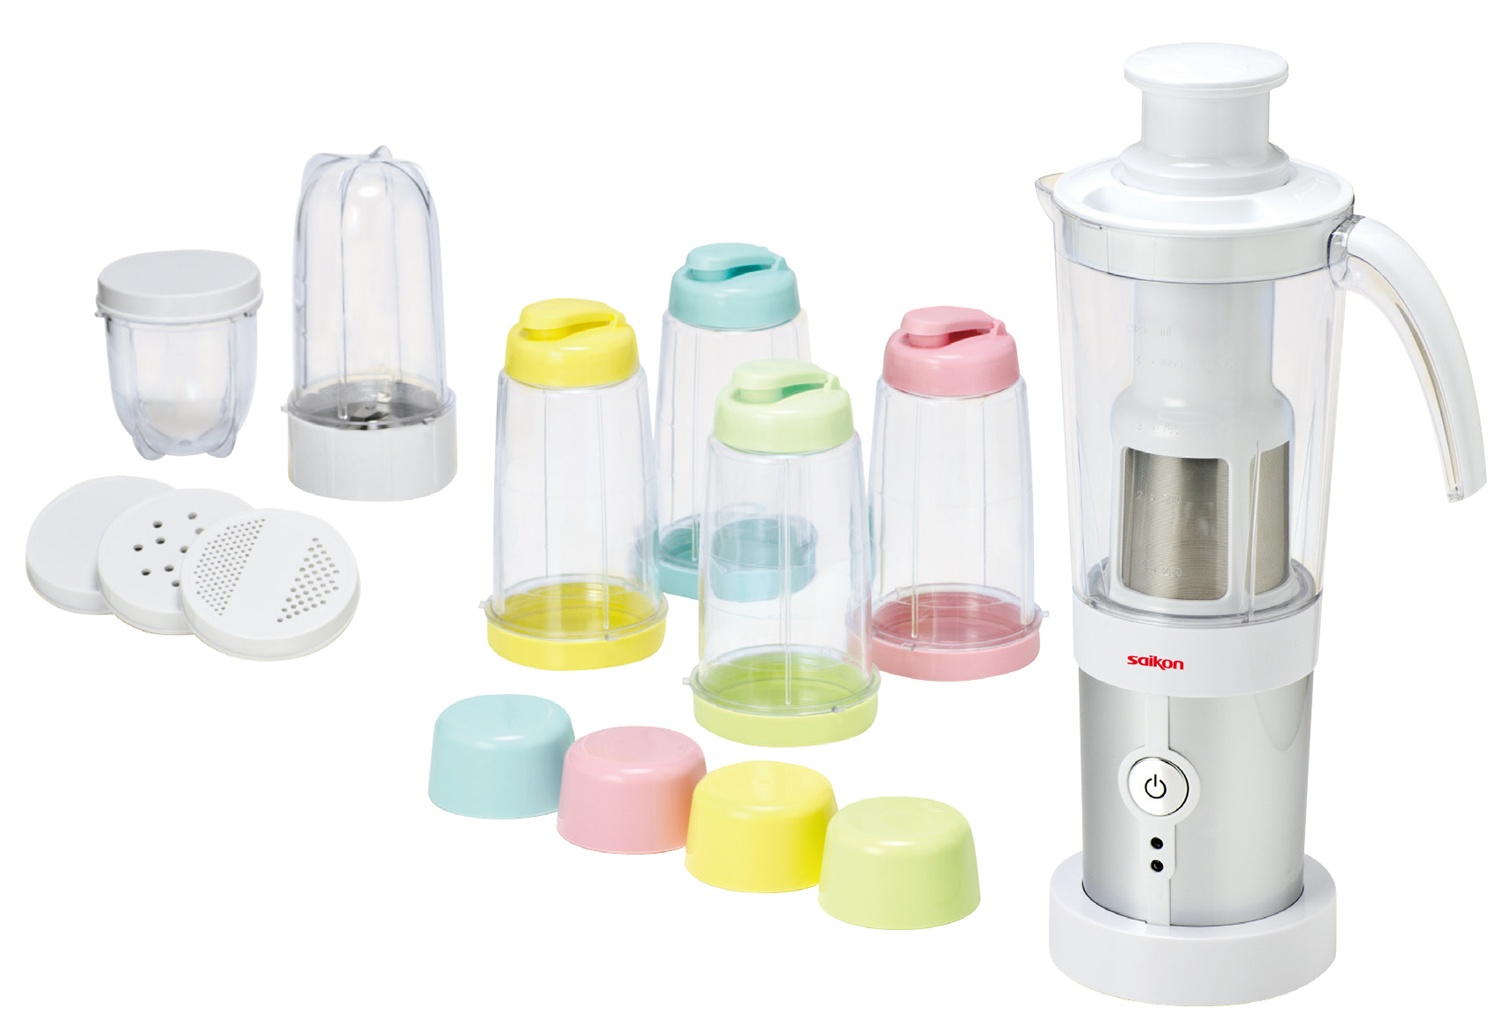 Multifunction Food Blender and use for travling